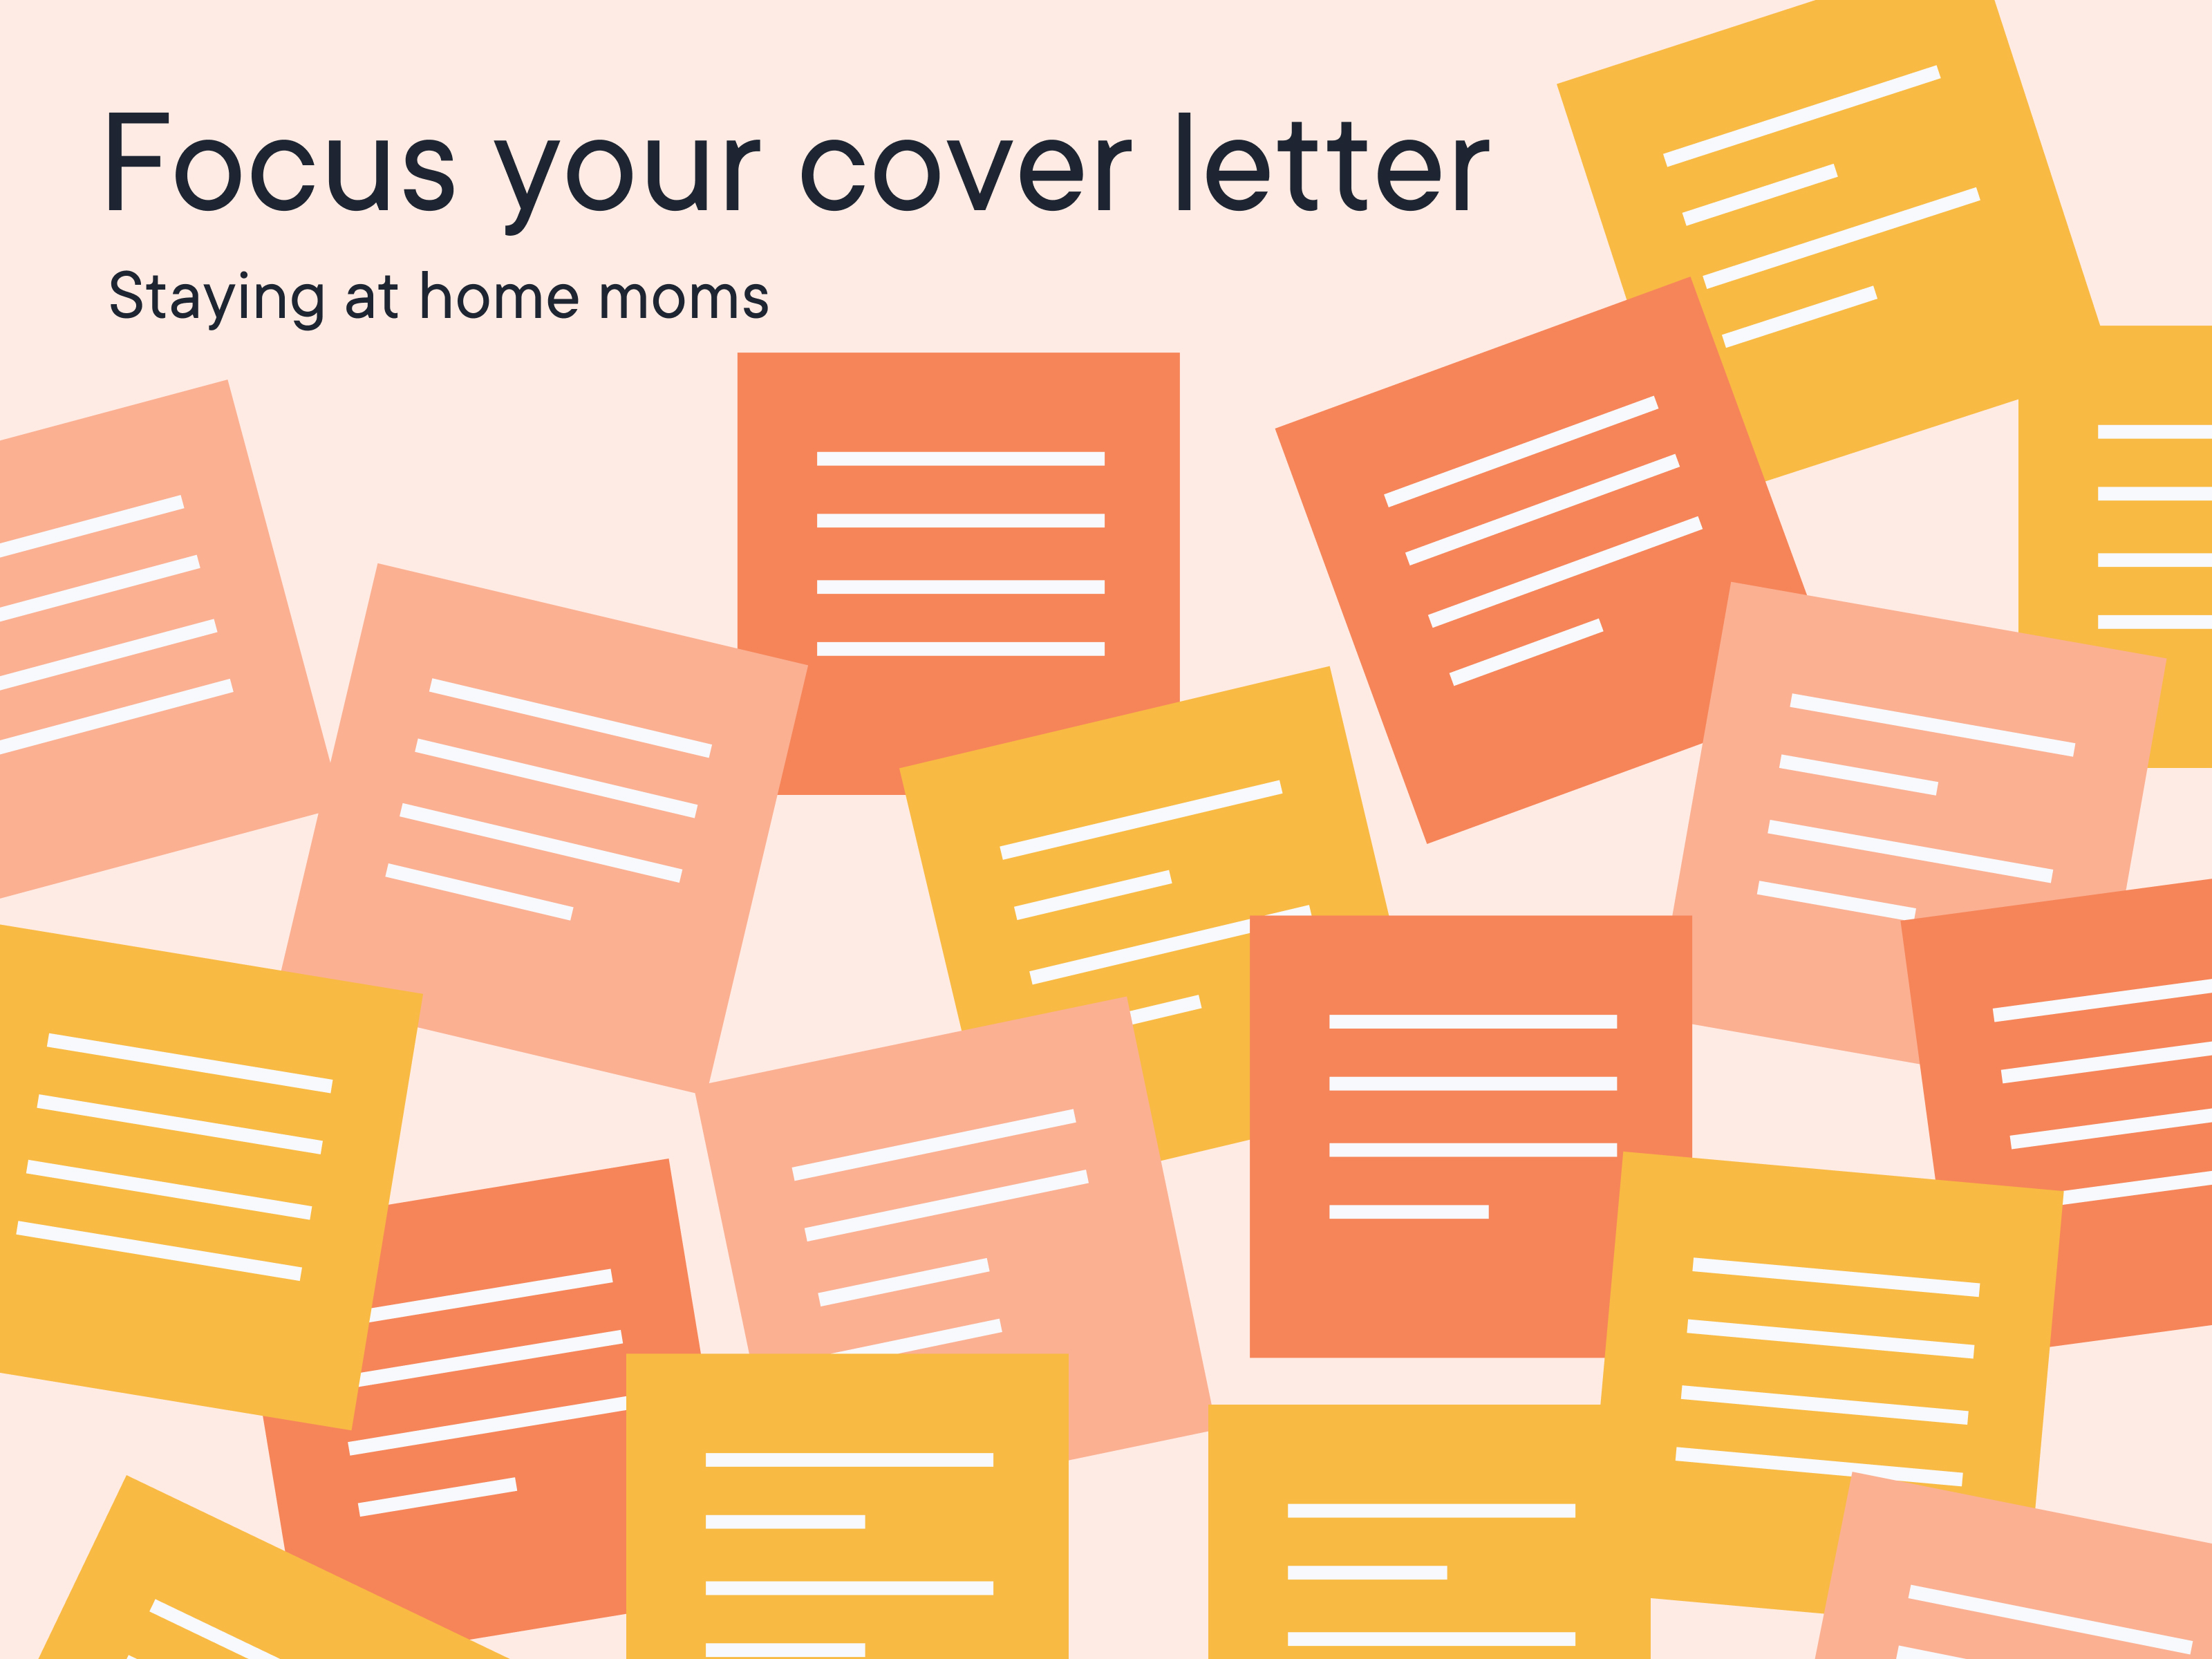 Focus your cover letter